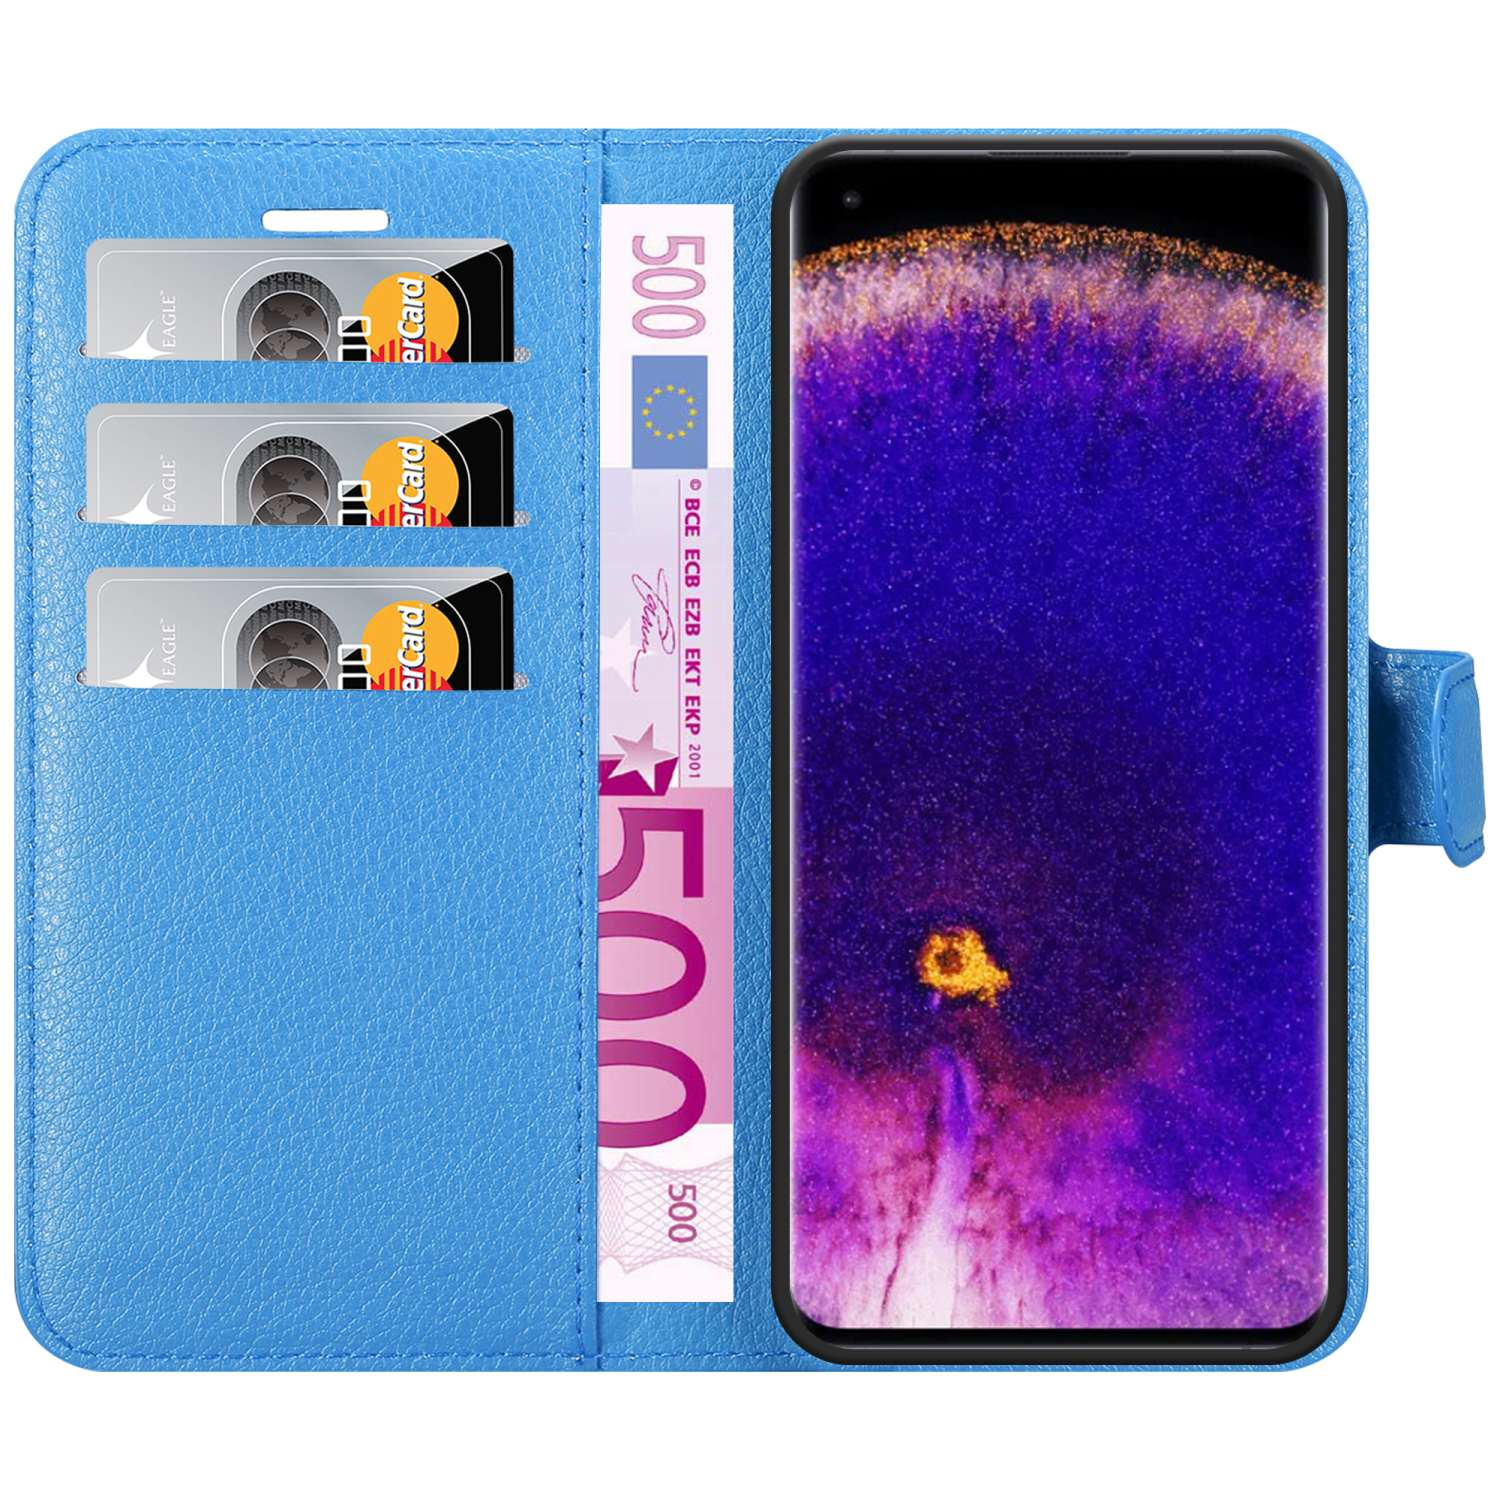 Standfunktion, Hülle BLAU Bookcover, Oppo, X5 FIND PRO, Book CADORABO PASTELL